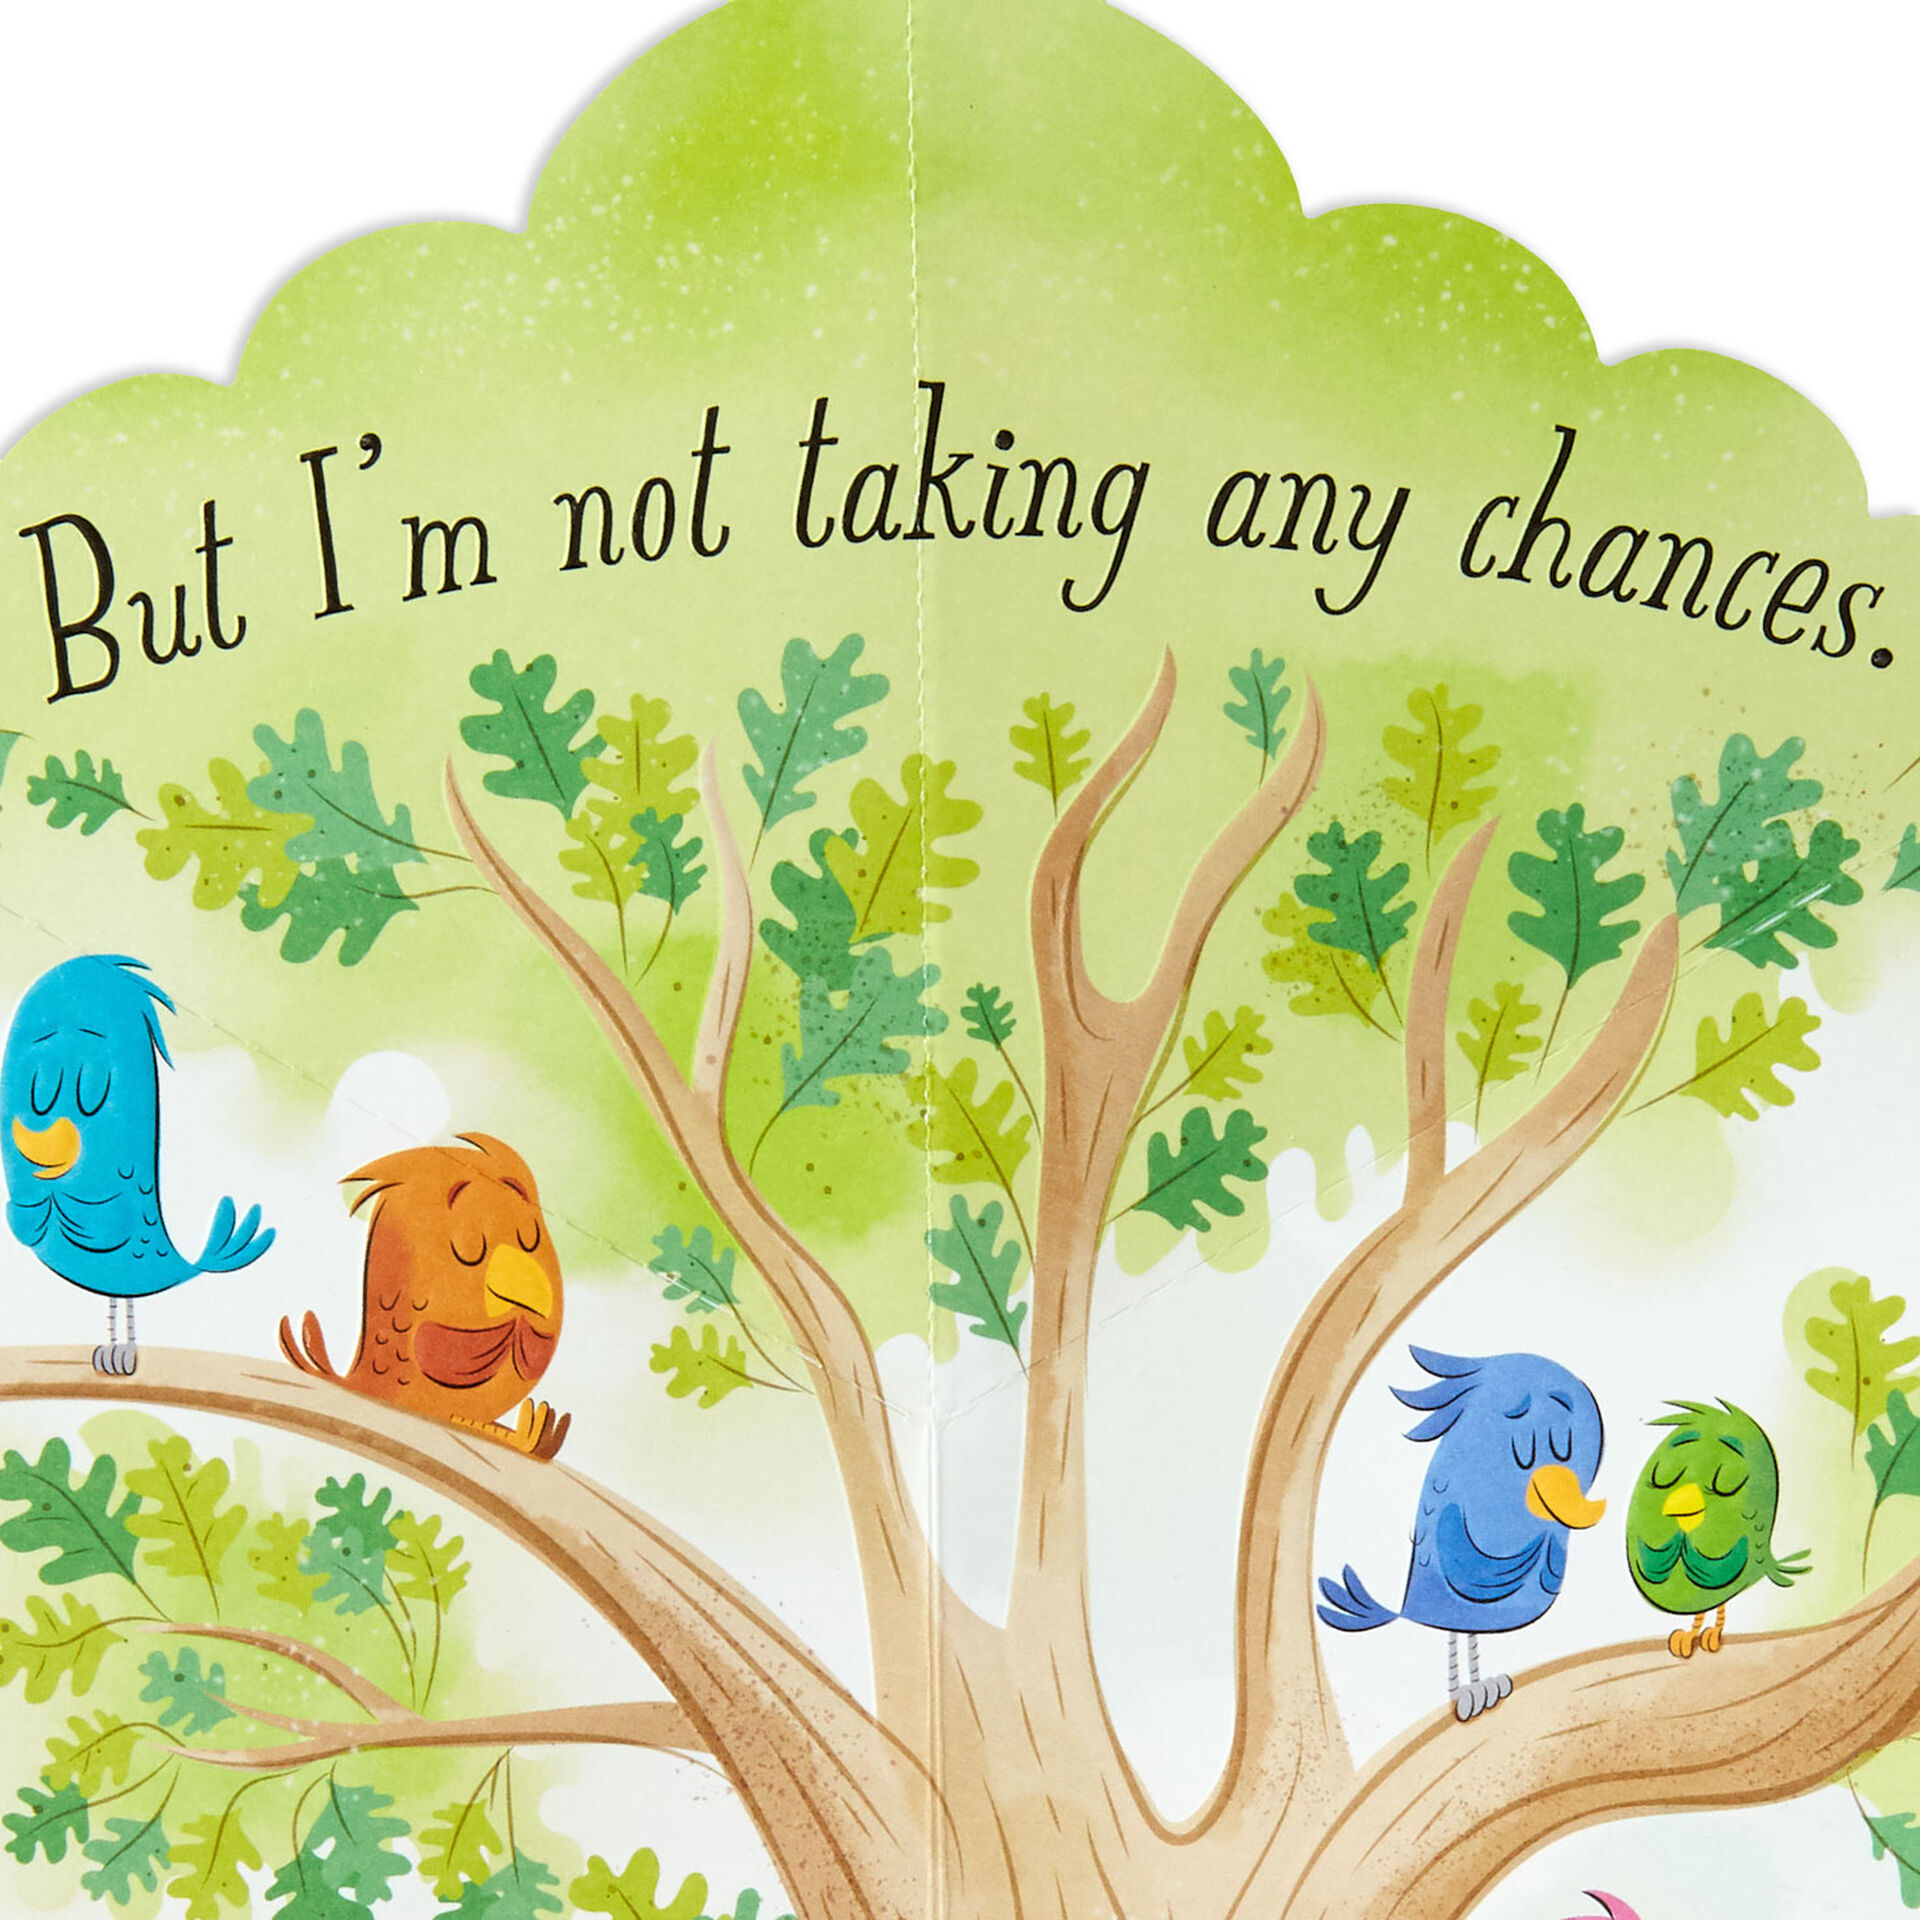 Birds-PopUp-Thinking-of-You-Card_379C3146_02